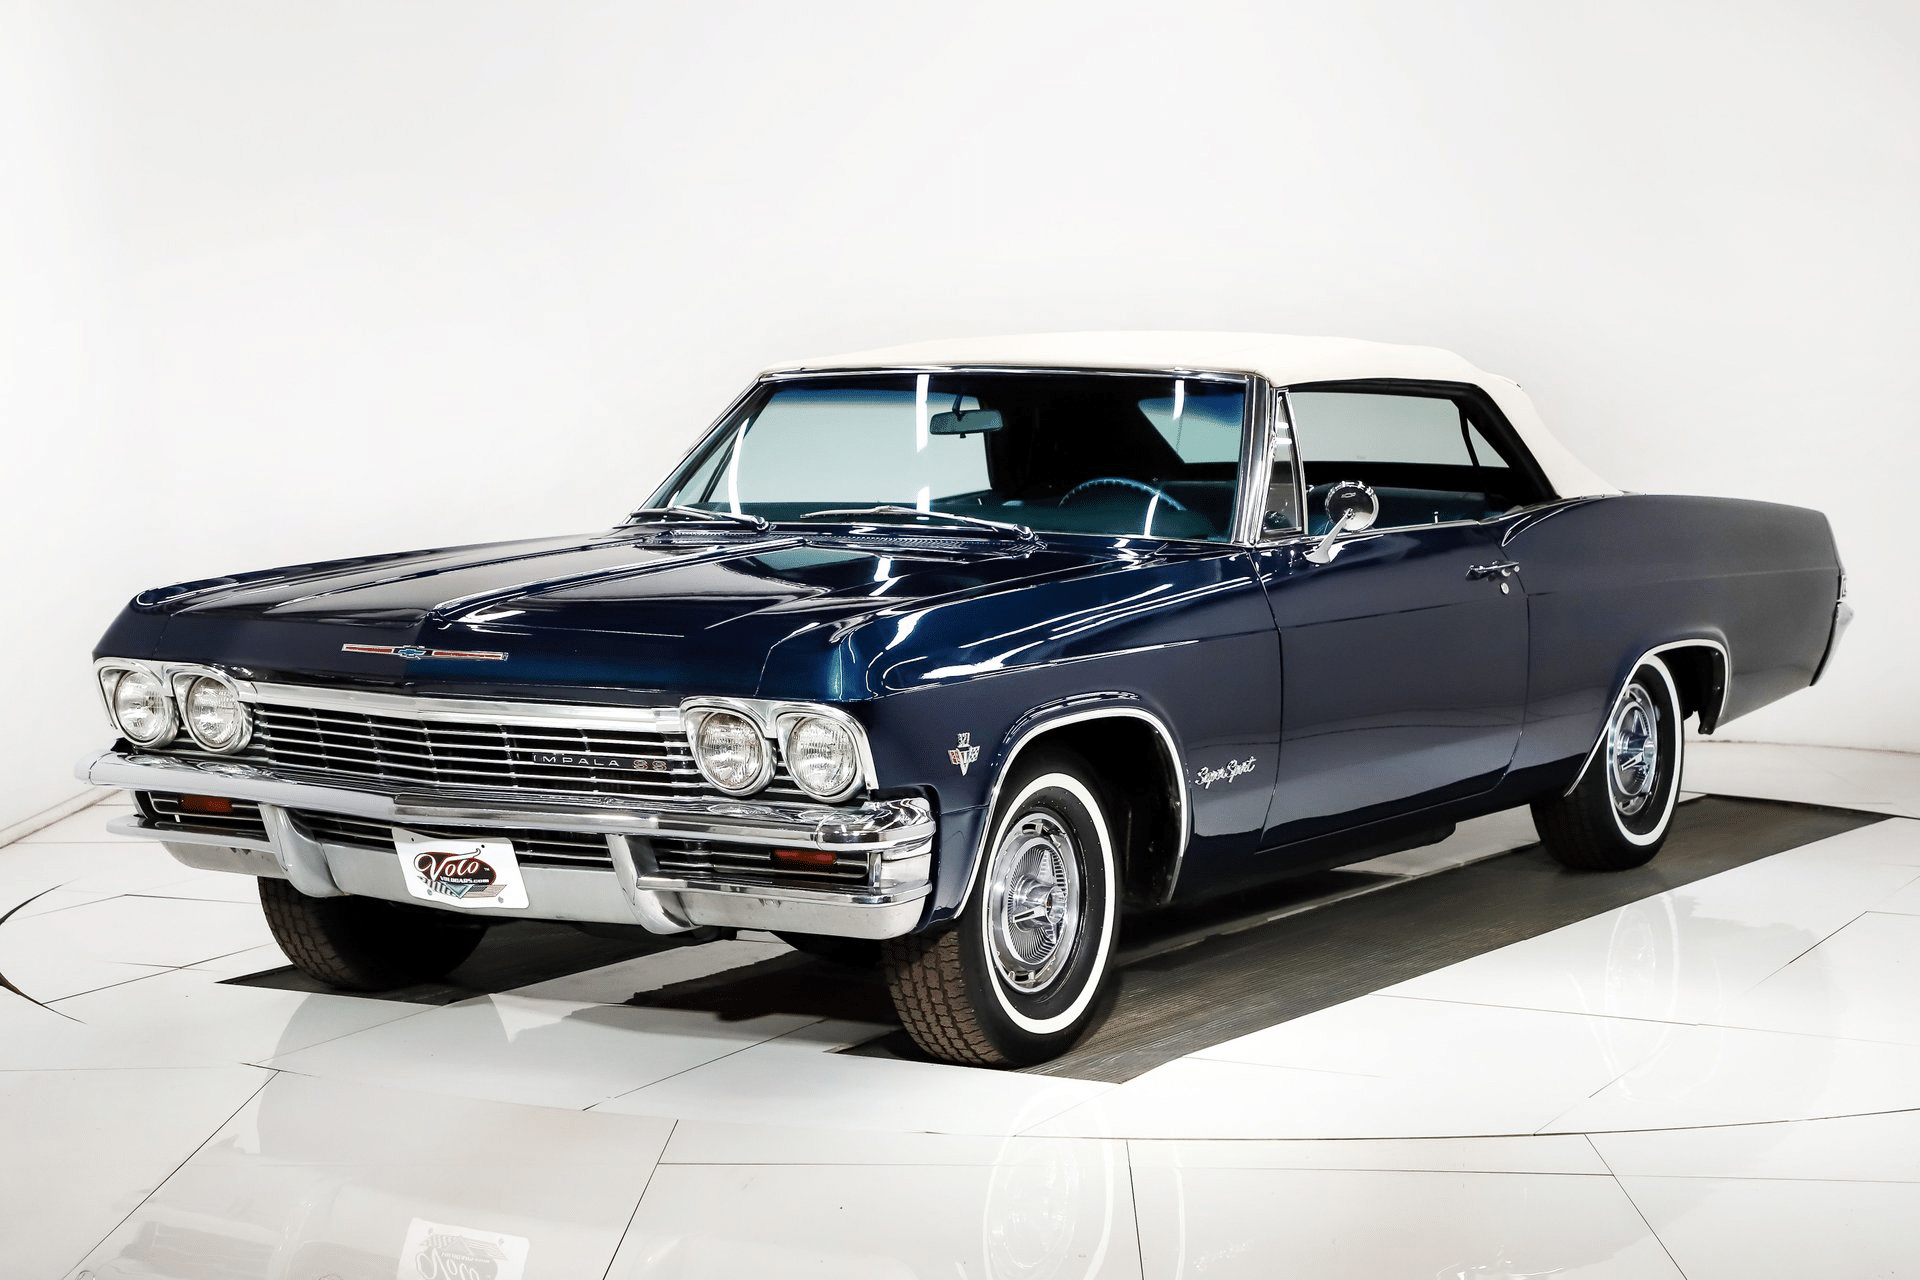 Classic Muscle Cars: The 1965 Chevrolet Impala SS